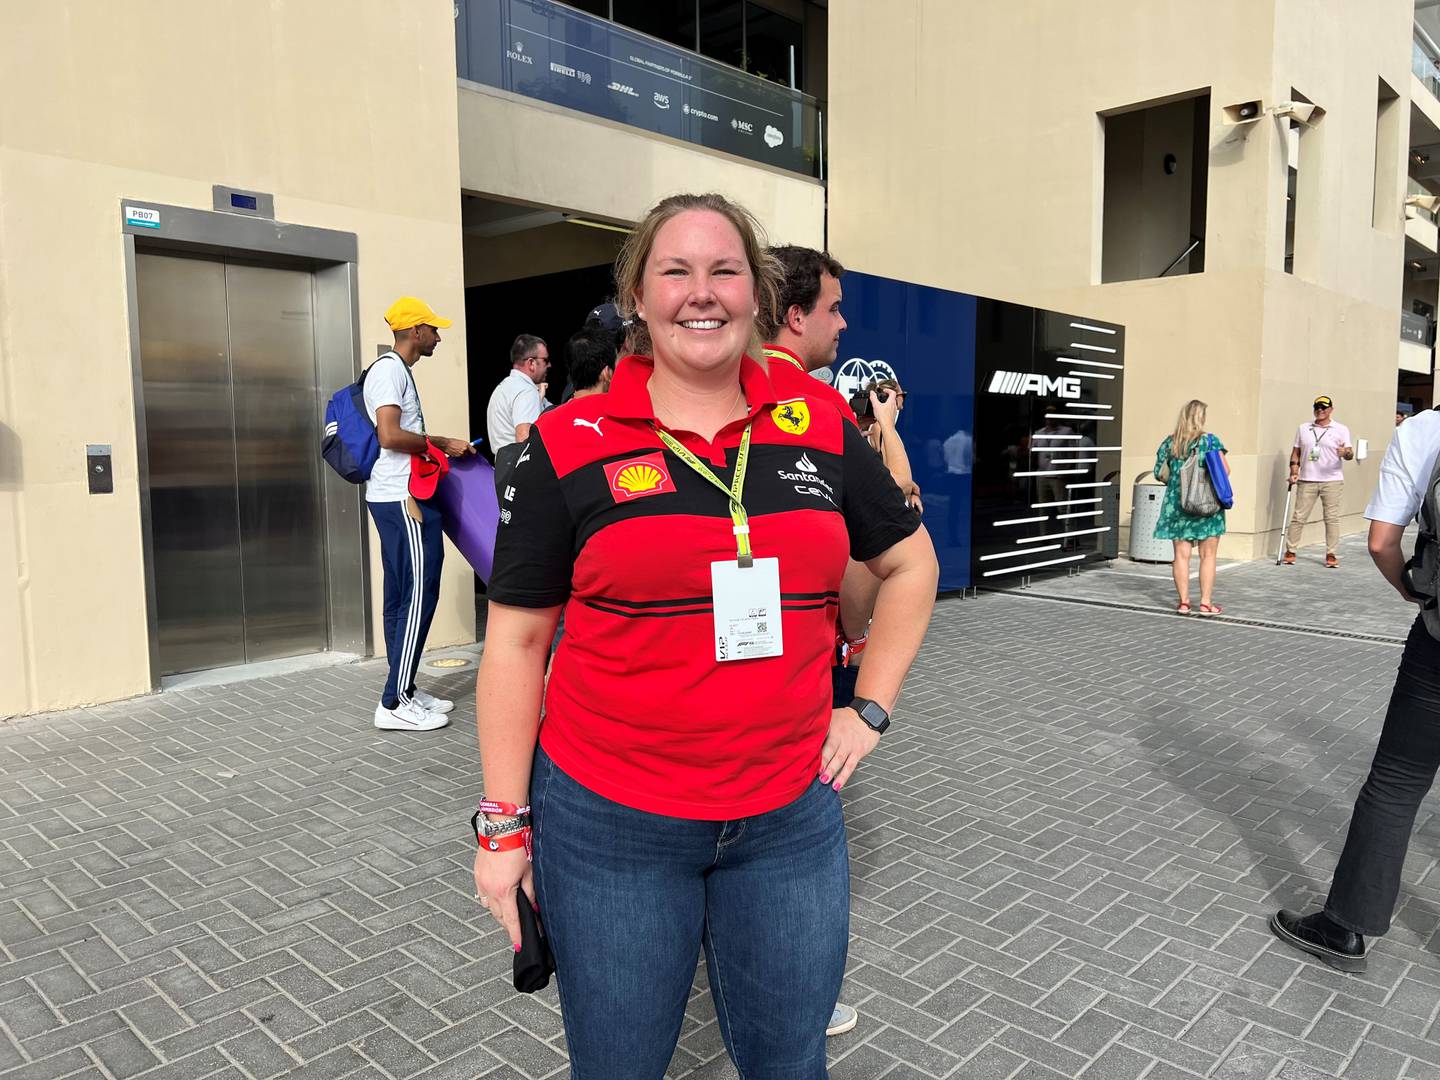 F1 fan Franscesca Allen flew in from London to experience the Abu Dhabi F1 Grand Prix. Saeed Saeed/The National